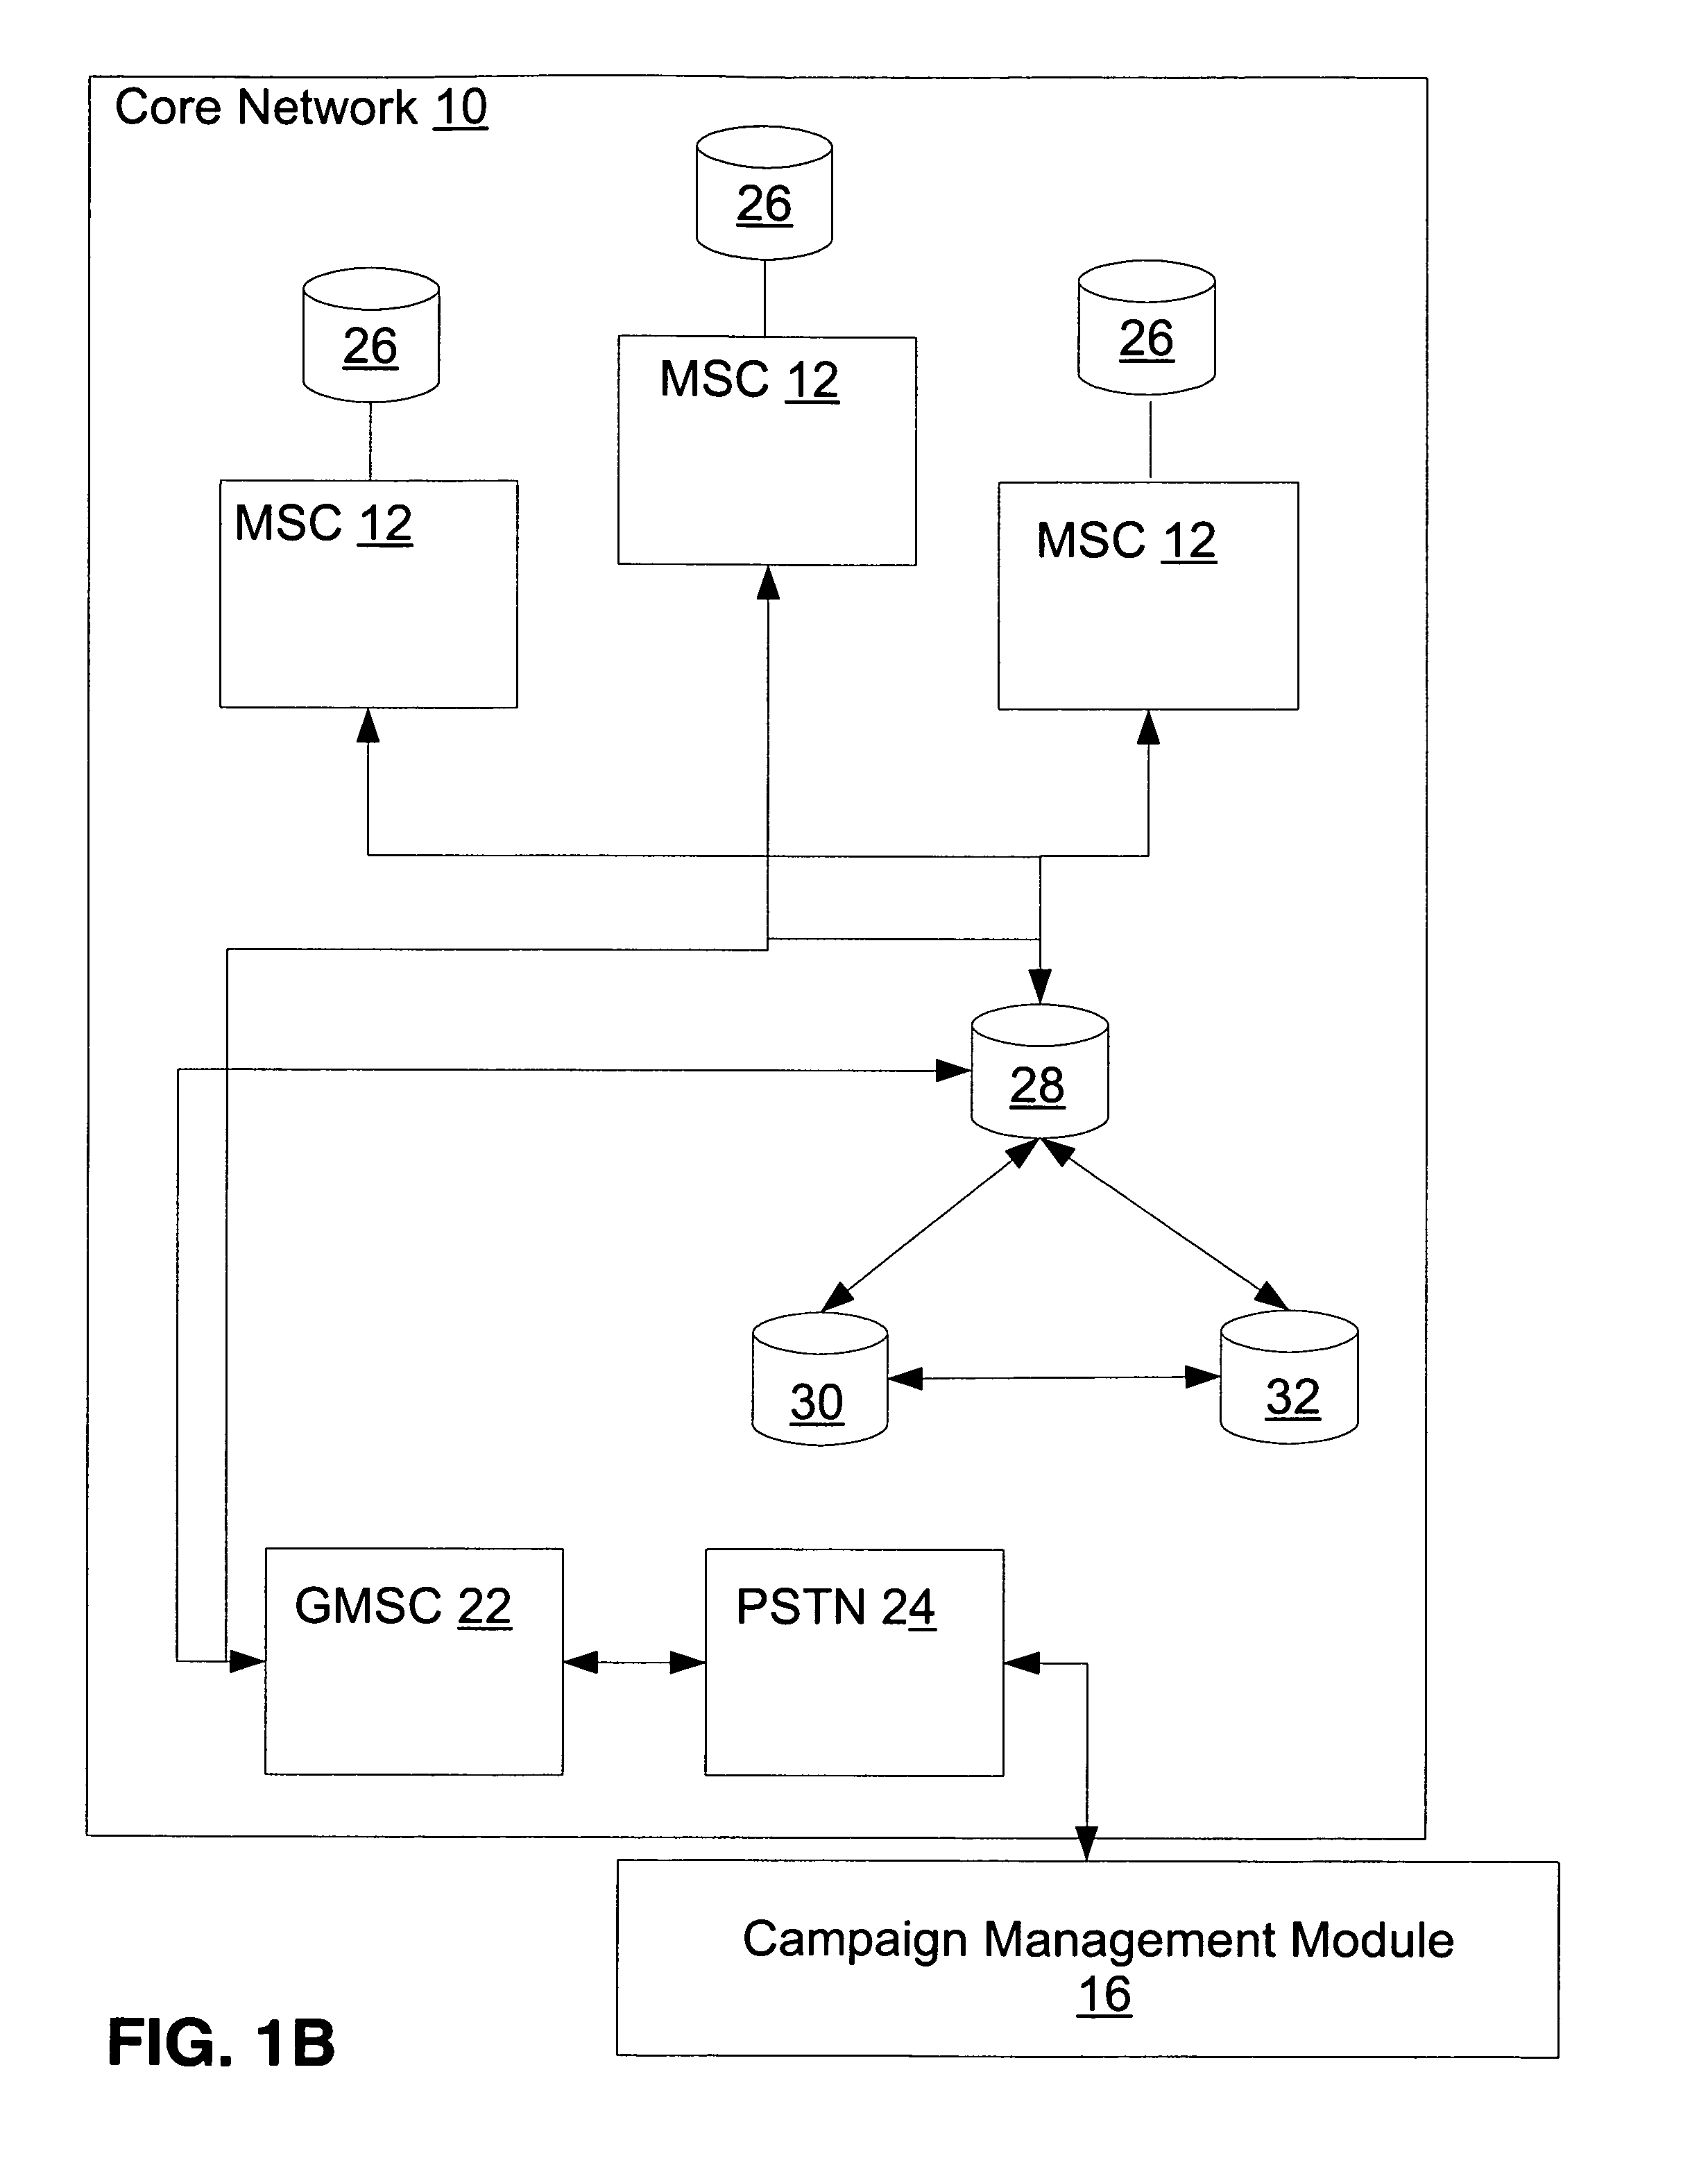 Systems and methods for establishing a telecommunications bridge between a user device and a node